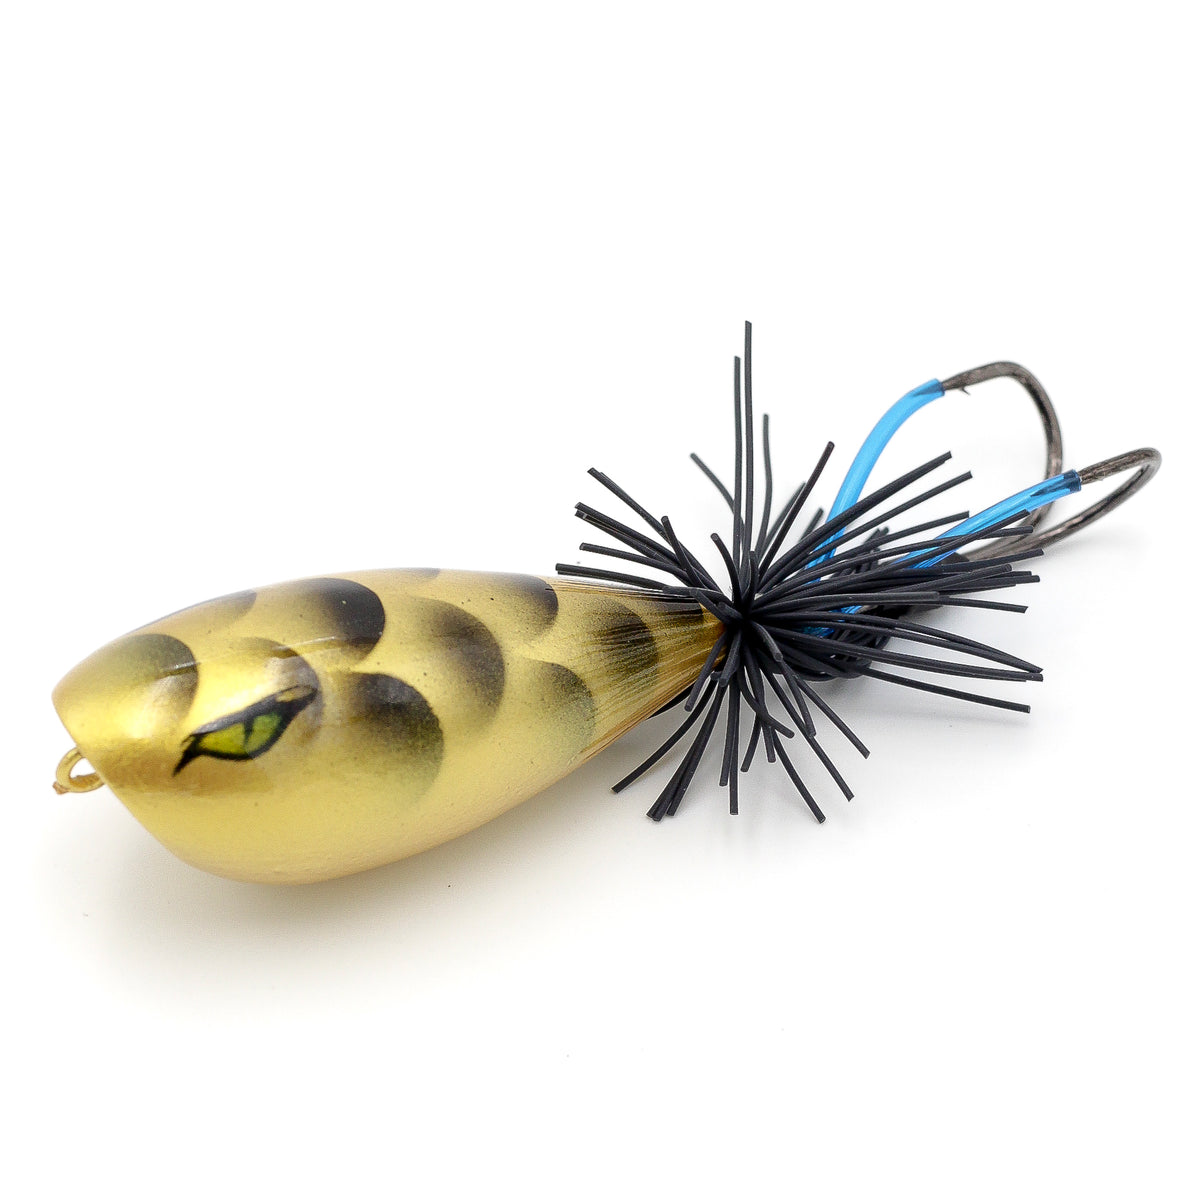 BOLT Soft Bait Silicone Fishing Lure Price in India - Buy BOLT Soft